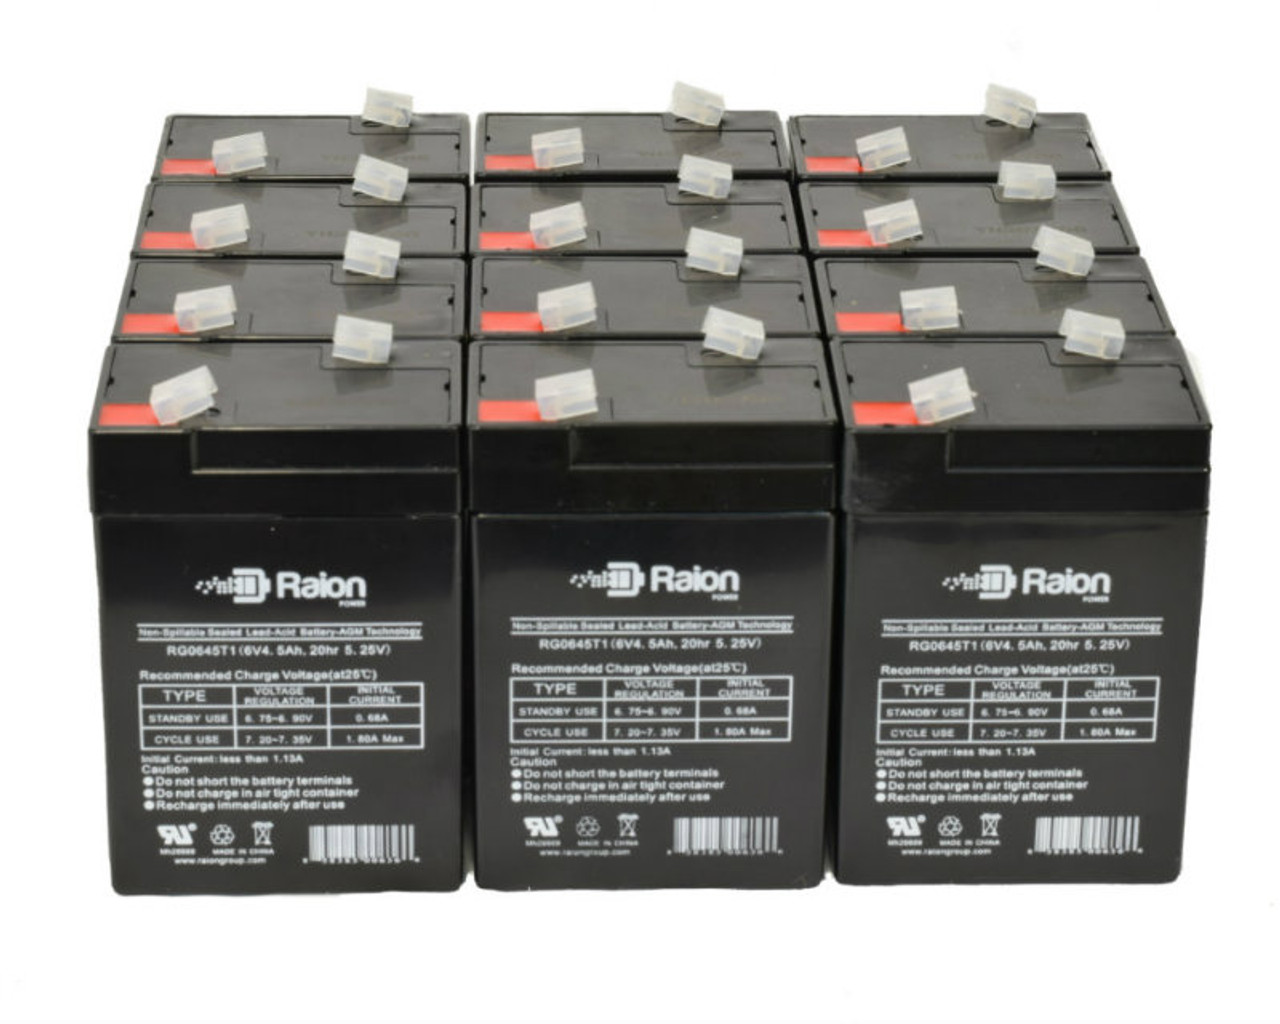 Raion Power 6V 4.5Ah Replacement Emergency Light Battery for Sure-Lites SL23196 - 12 Pack